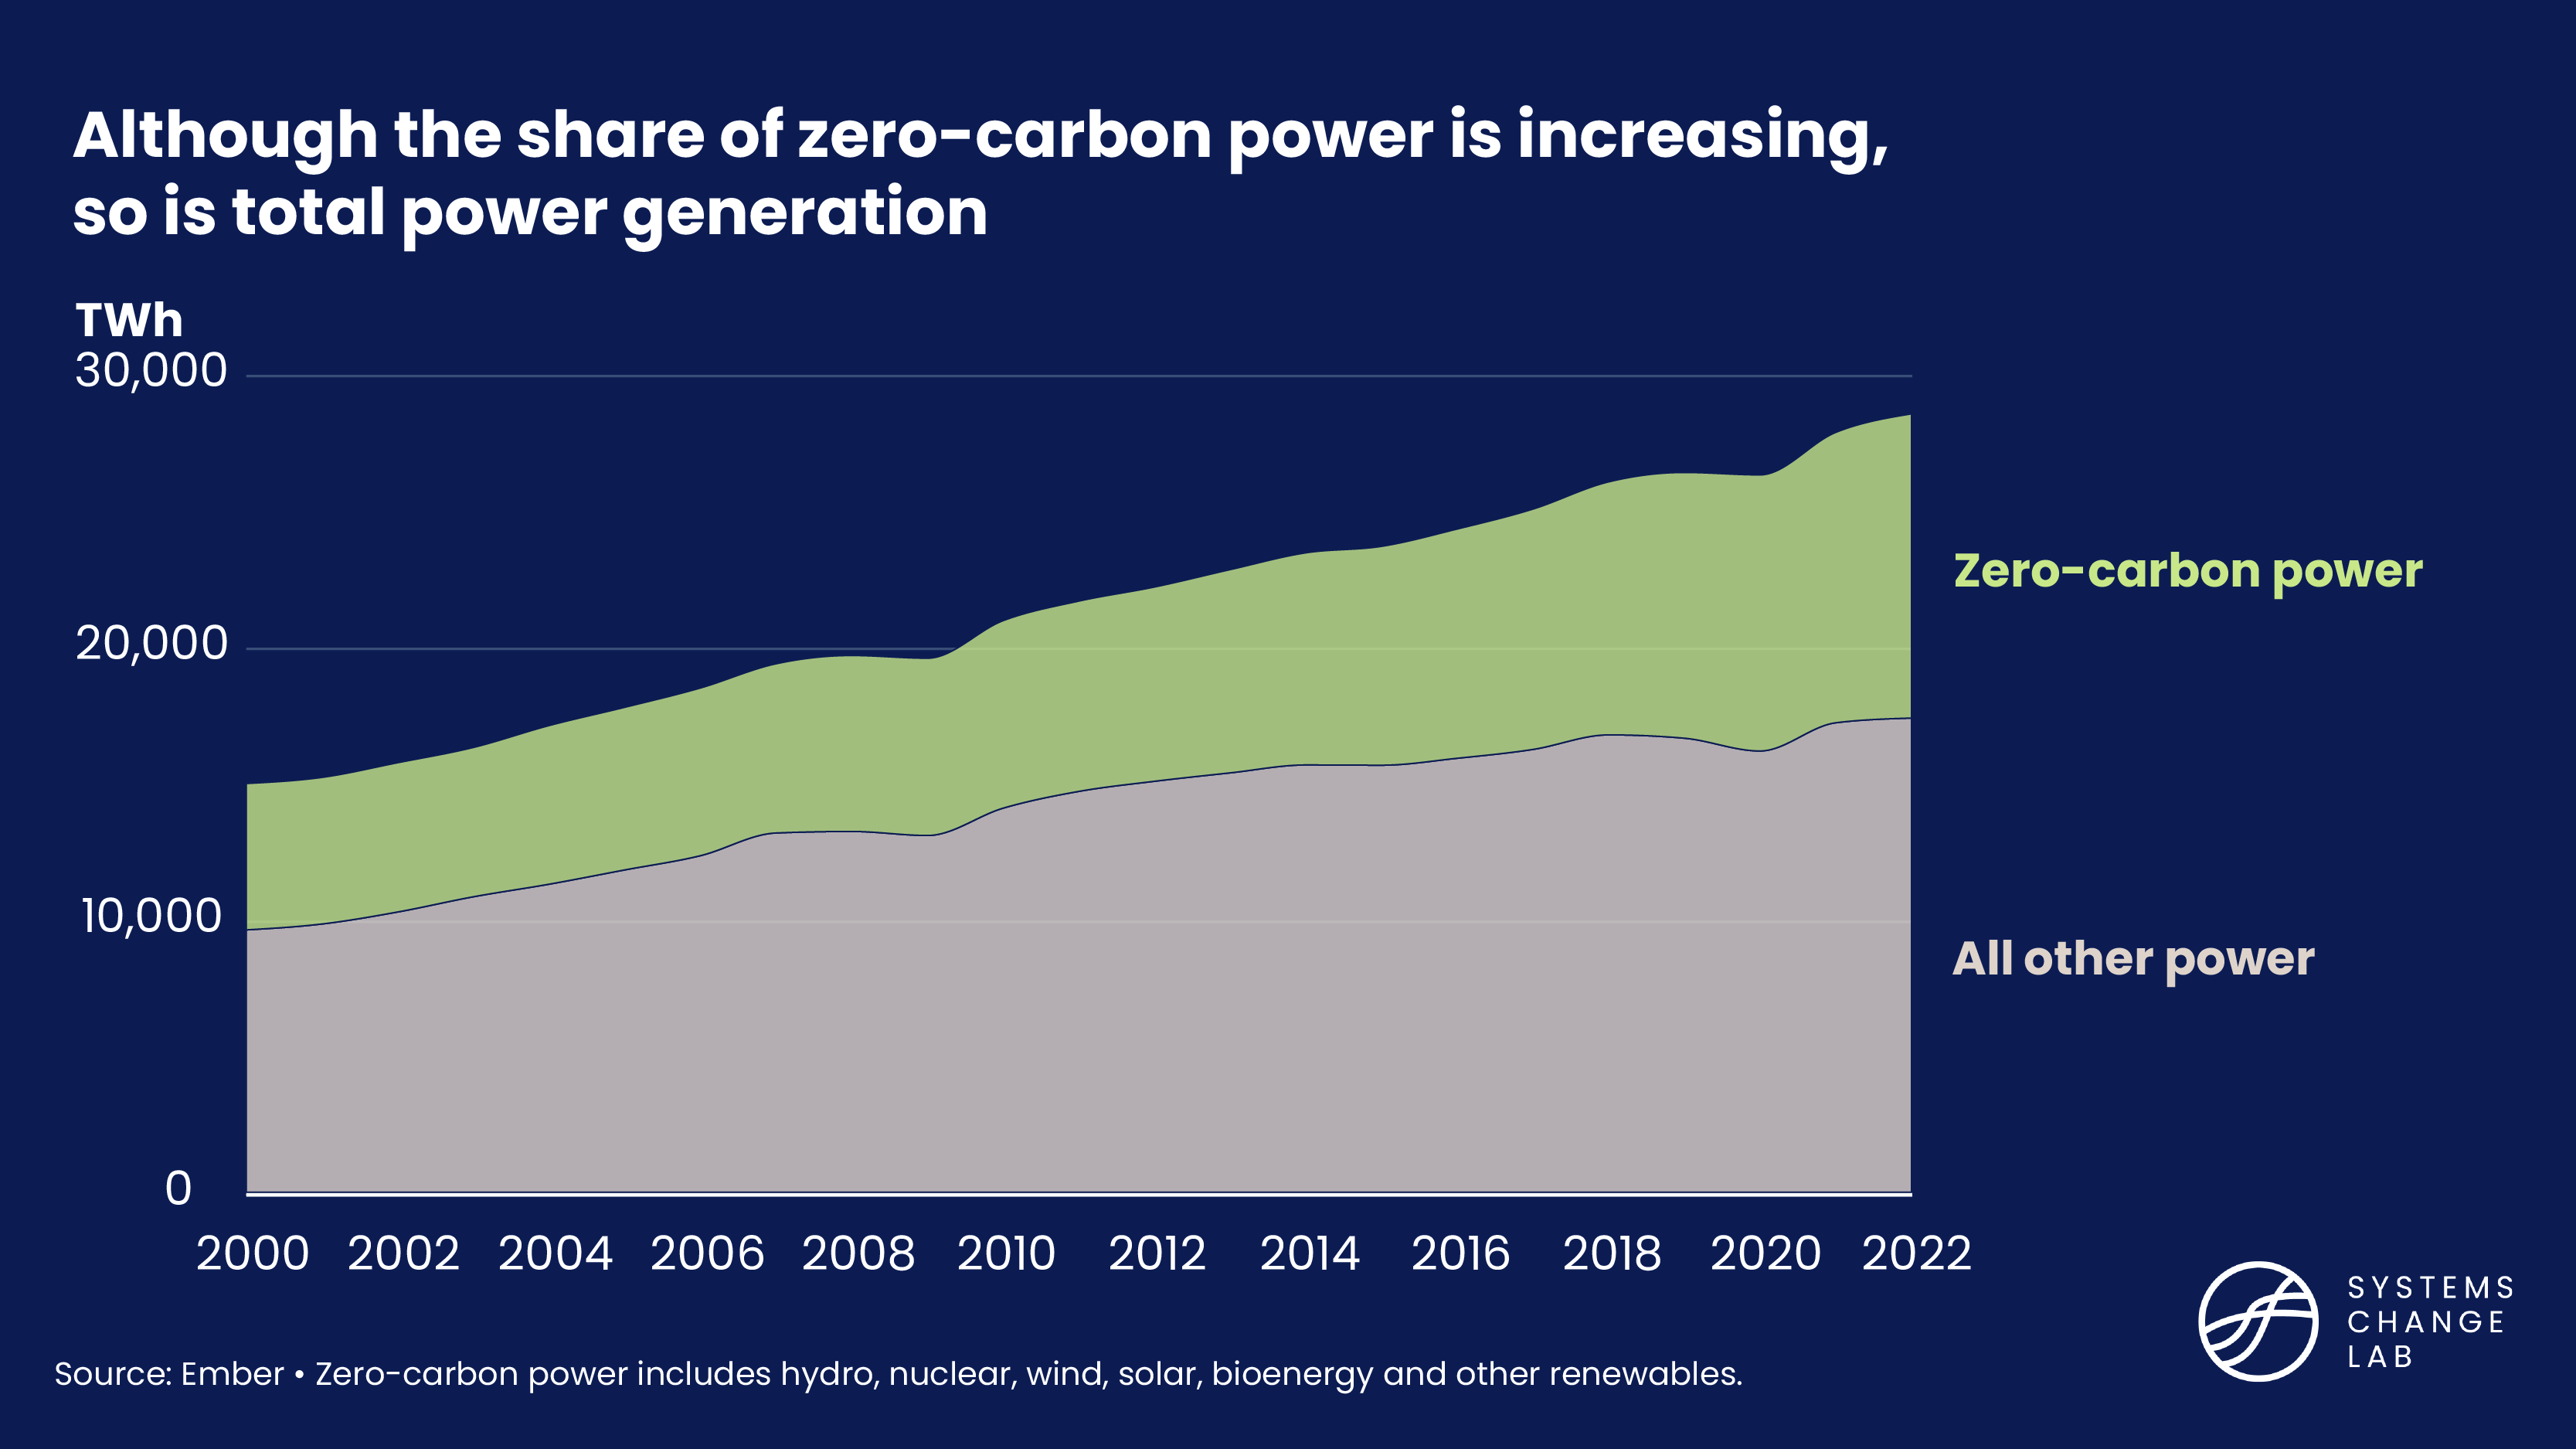 Share of zero-carbon power compared to total power generation, Although the share of zero-carbon power is increasing, so is total power generation